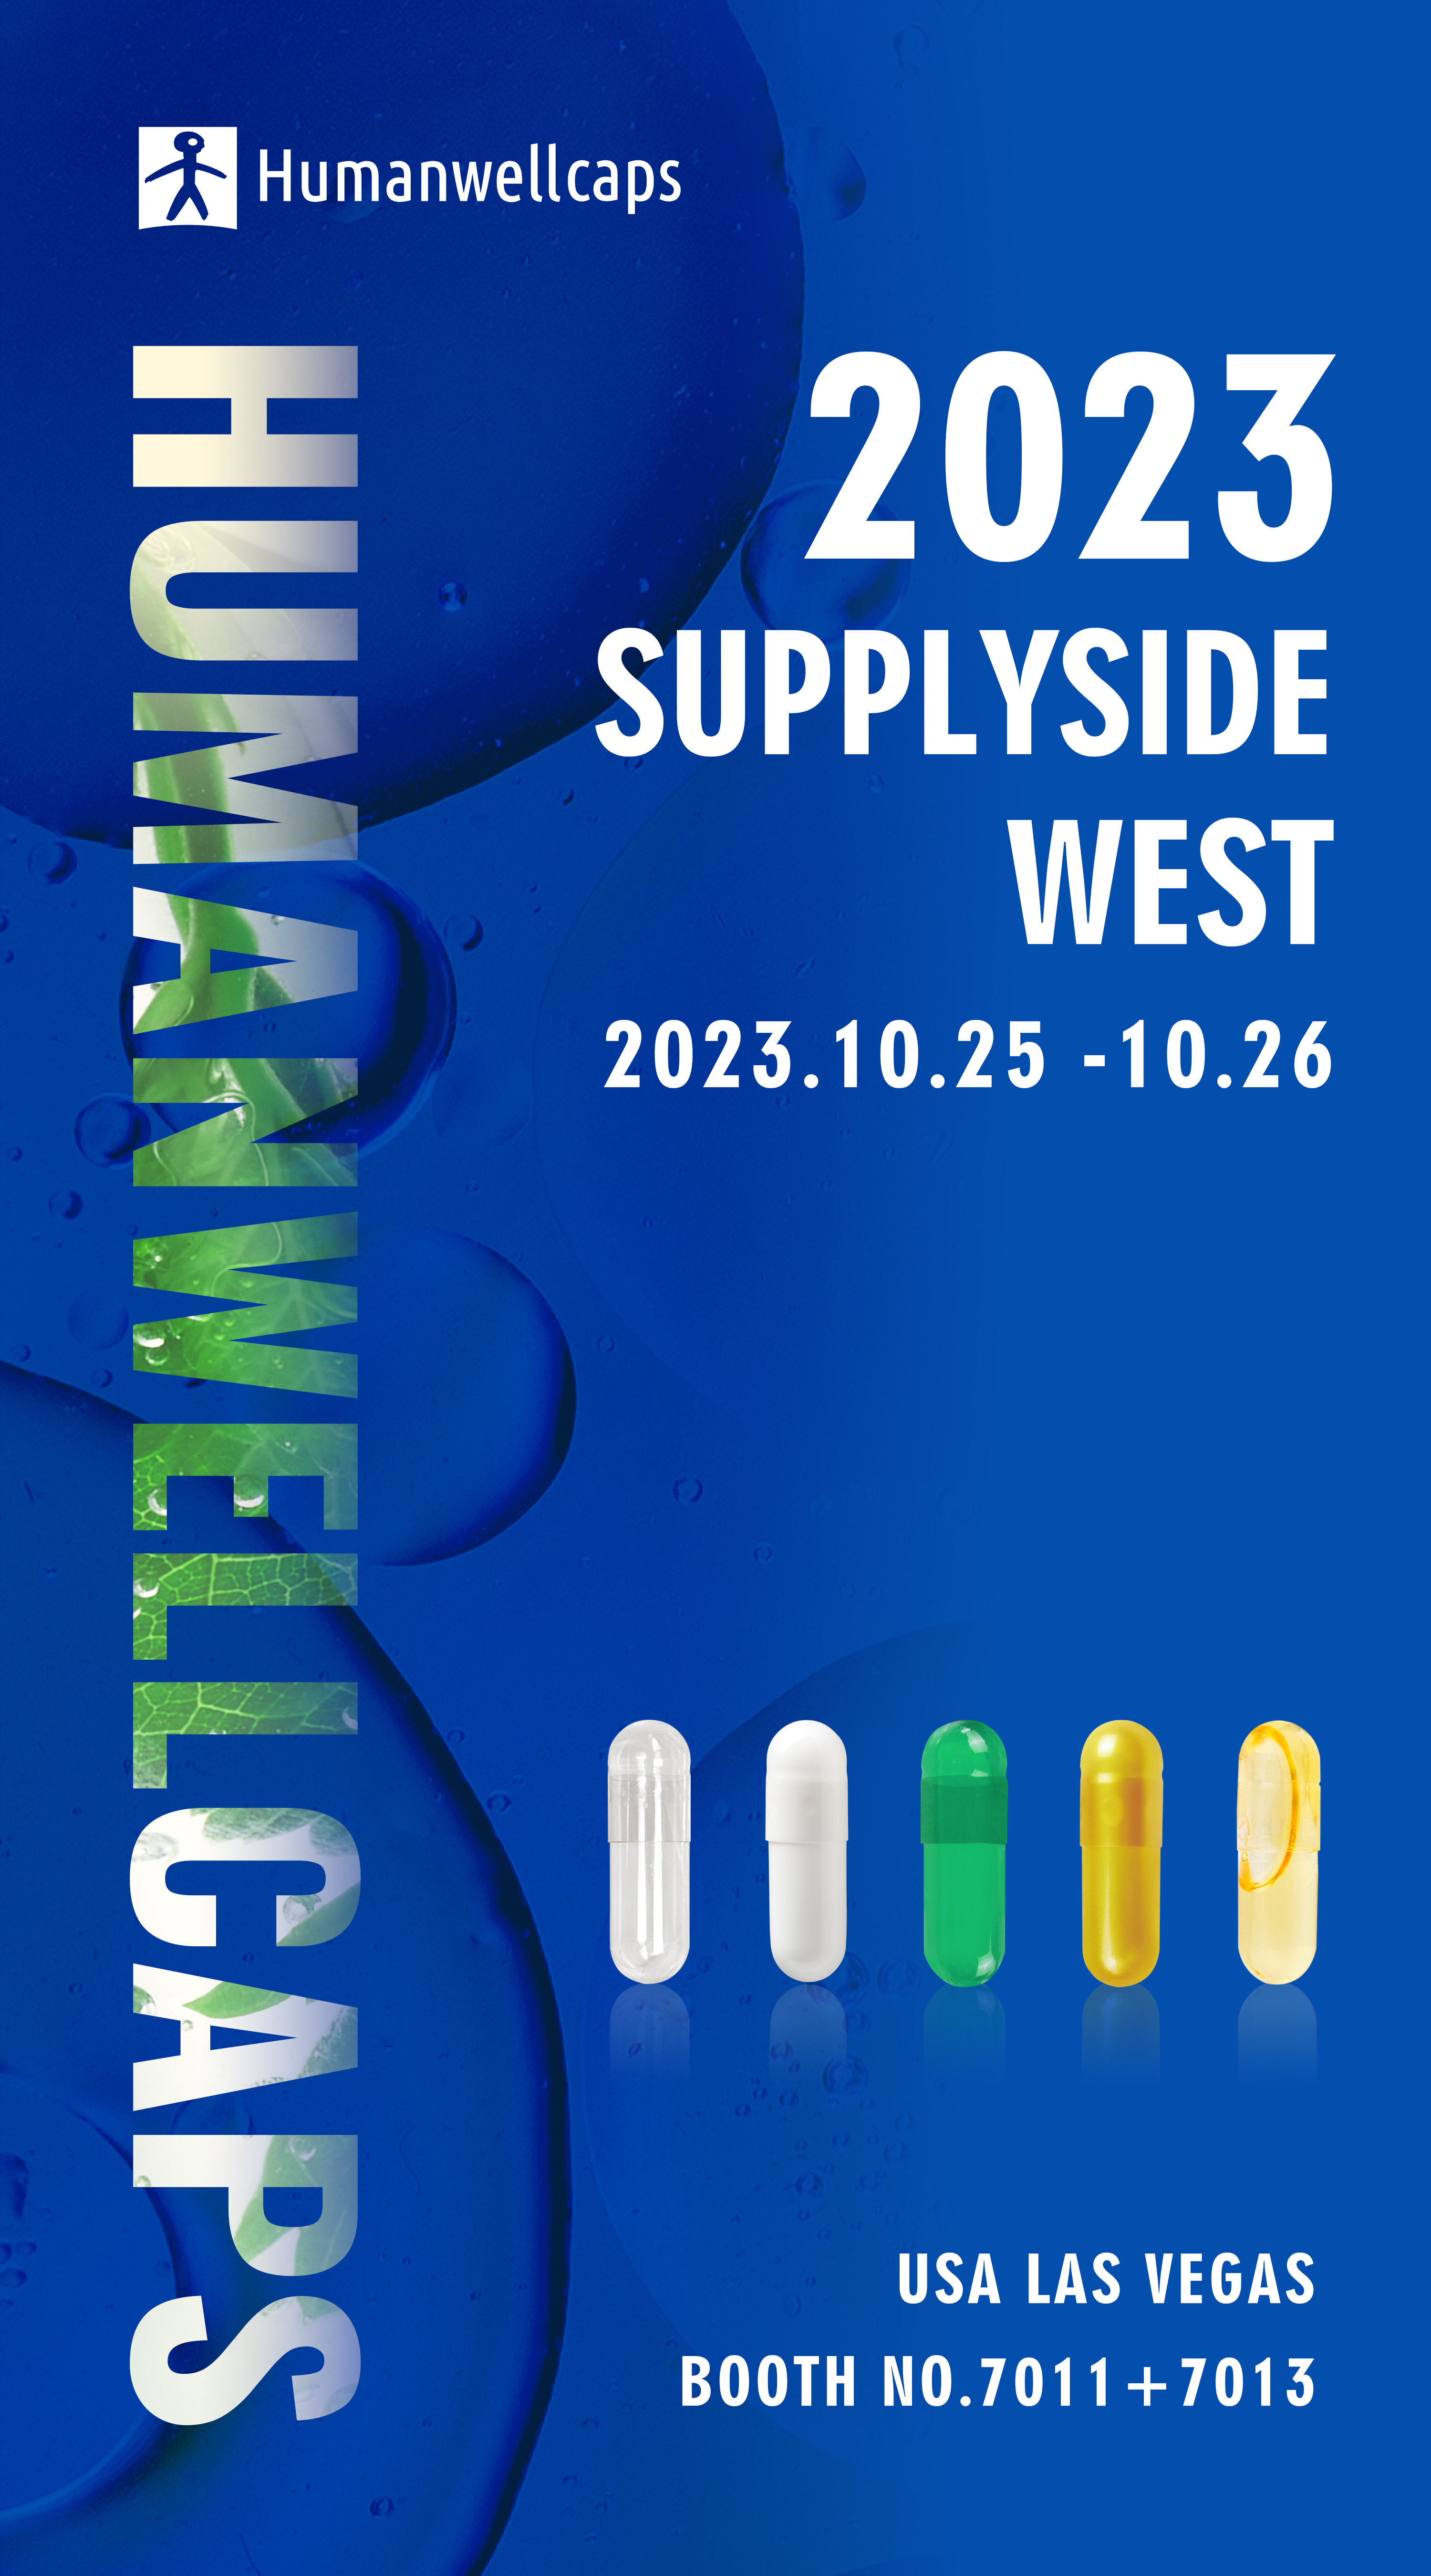 Humanwellcaps will participate Supplyside West exhibition in Las Vegas in late October